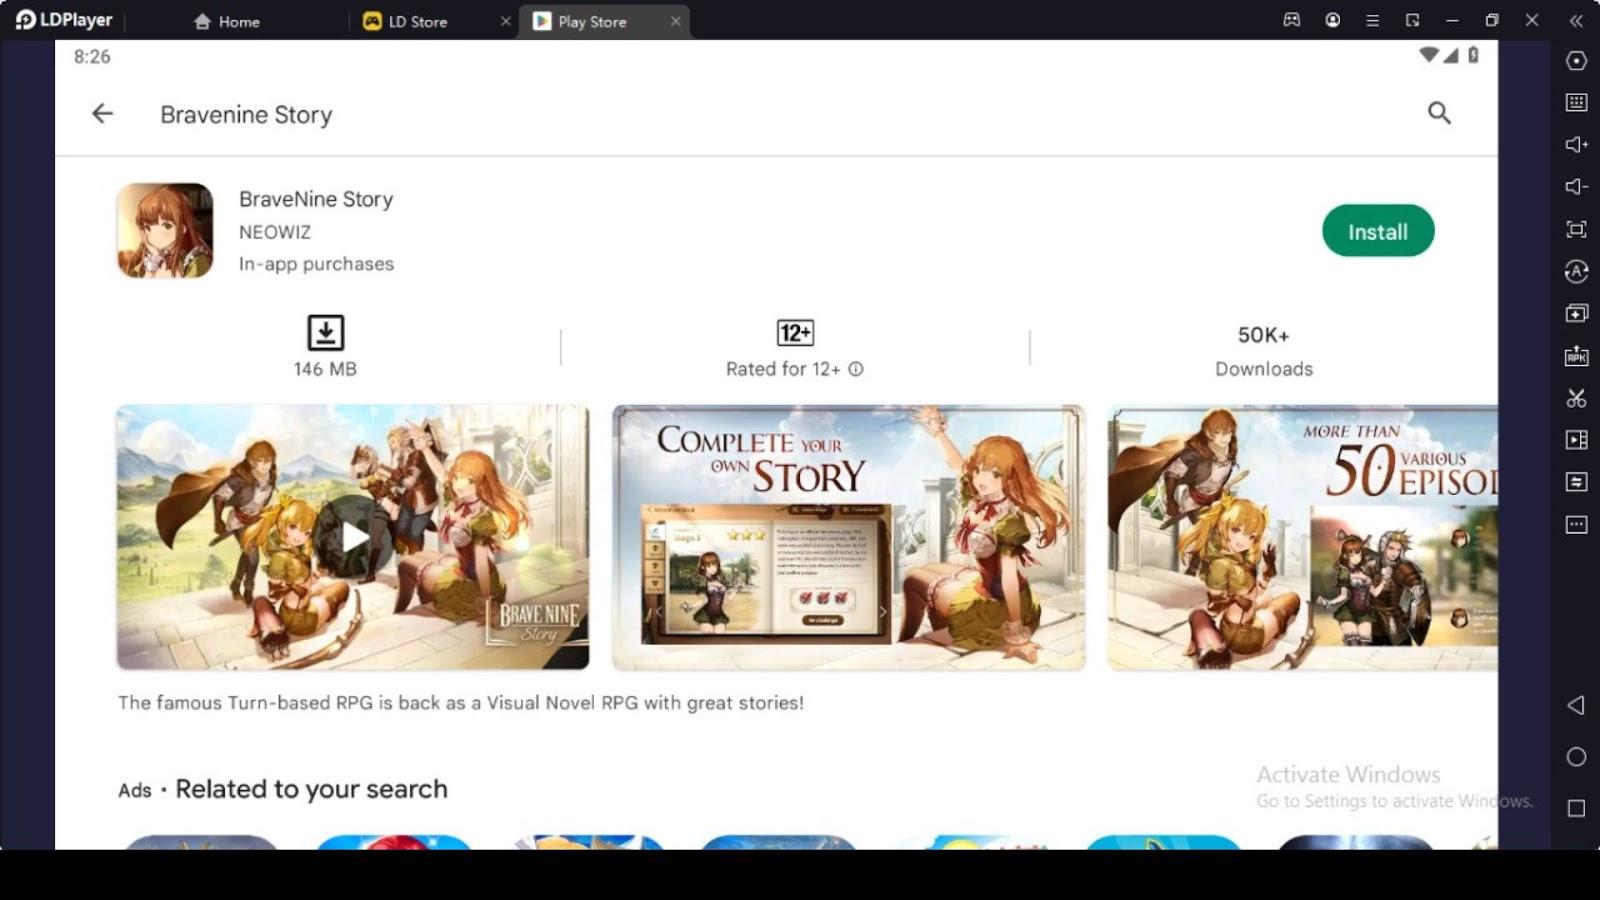 How to Play BraveNine Story on Your PC